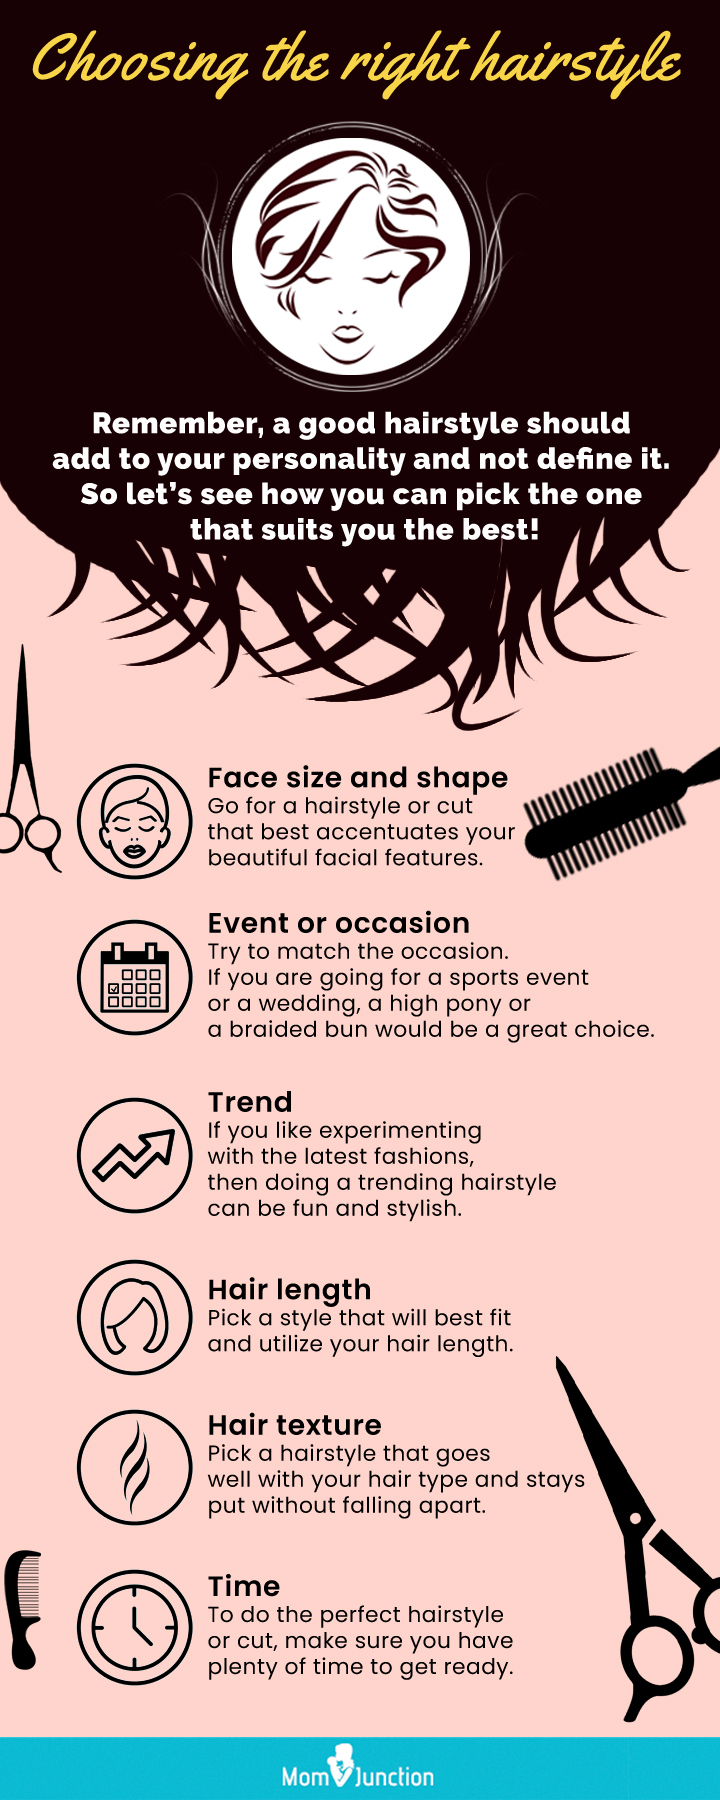 stylish haircuts and trendy hairstyles for teenage girls (infographic)